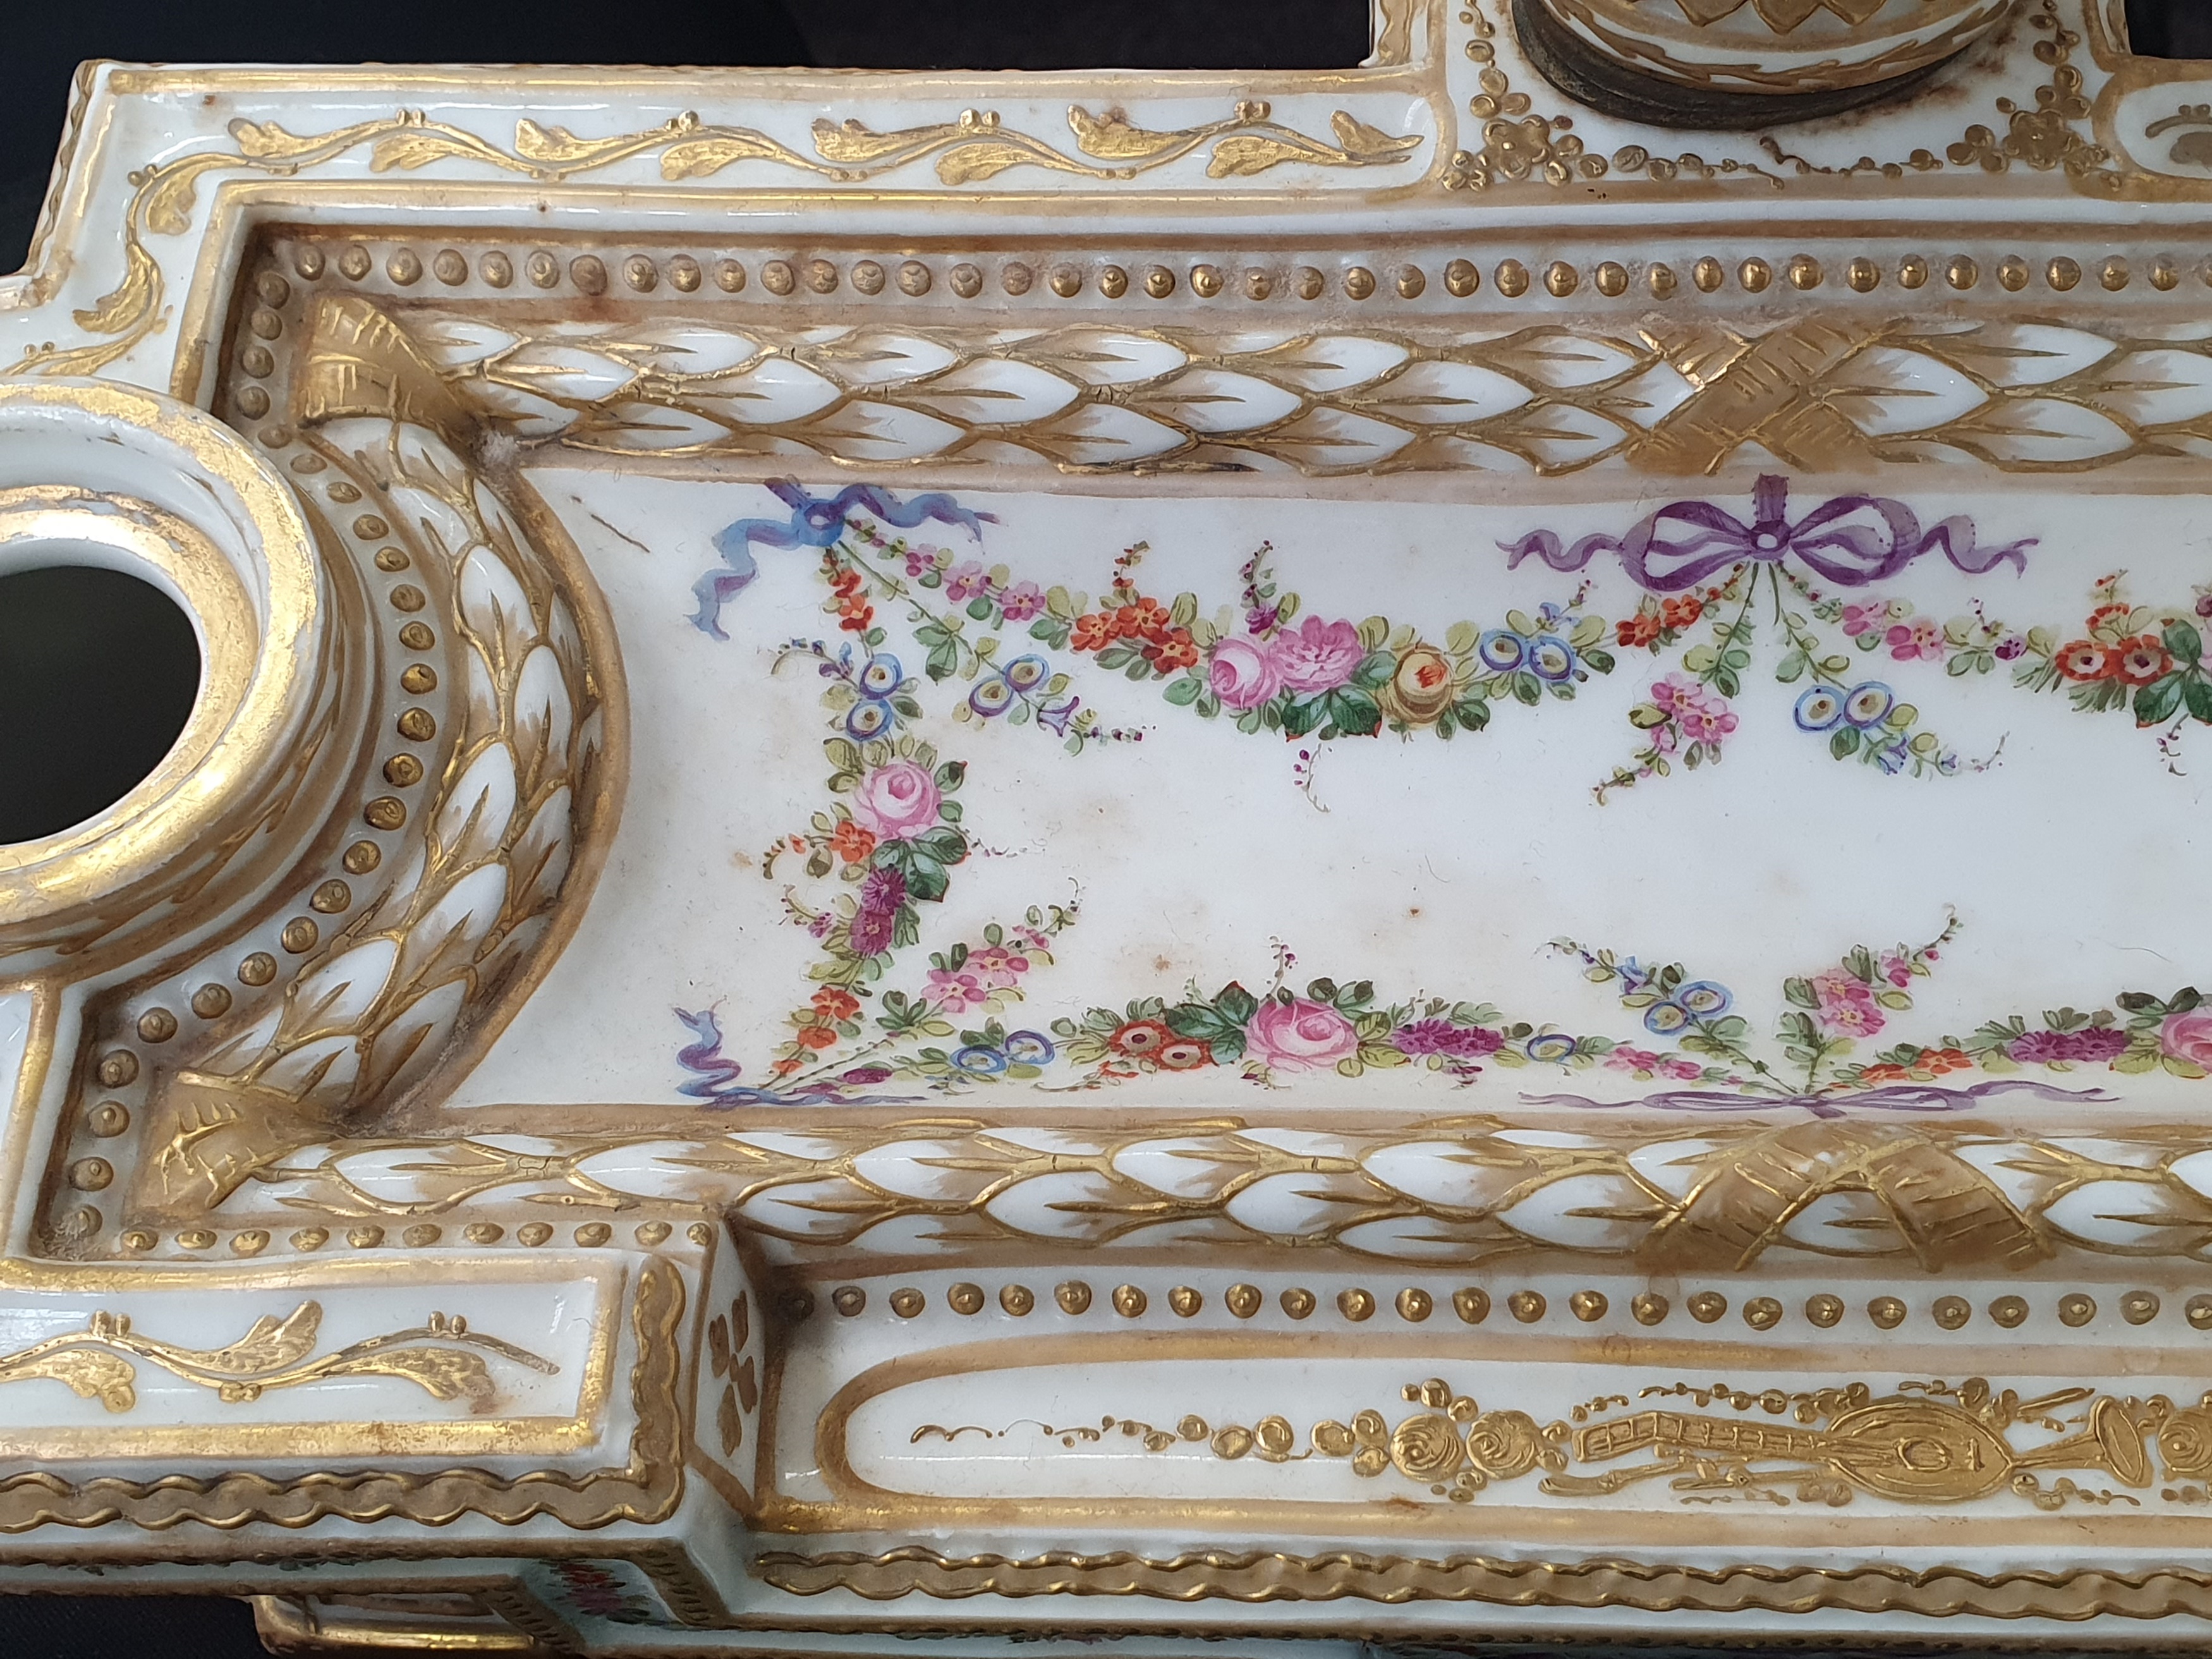 A FRENCH PARIS PORCELAIN PEN TRAY OF NEOCLASSICAL DESIGN, LATE 19TH CENTURY - Image 8 of 22